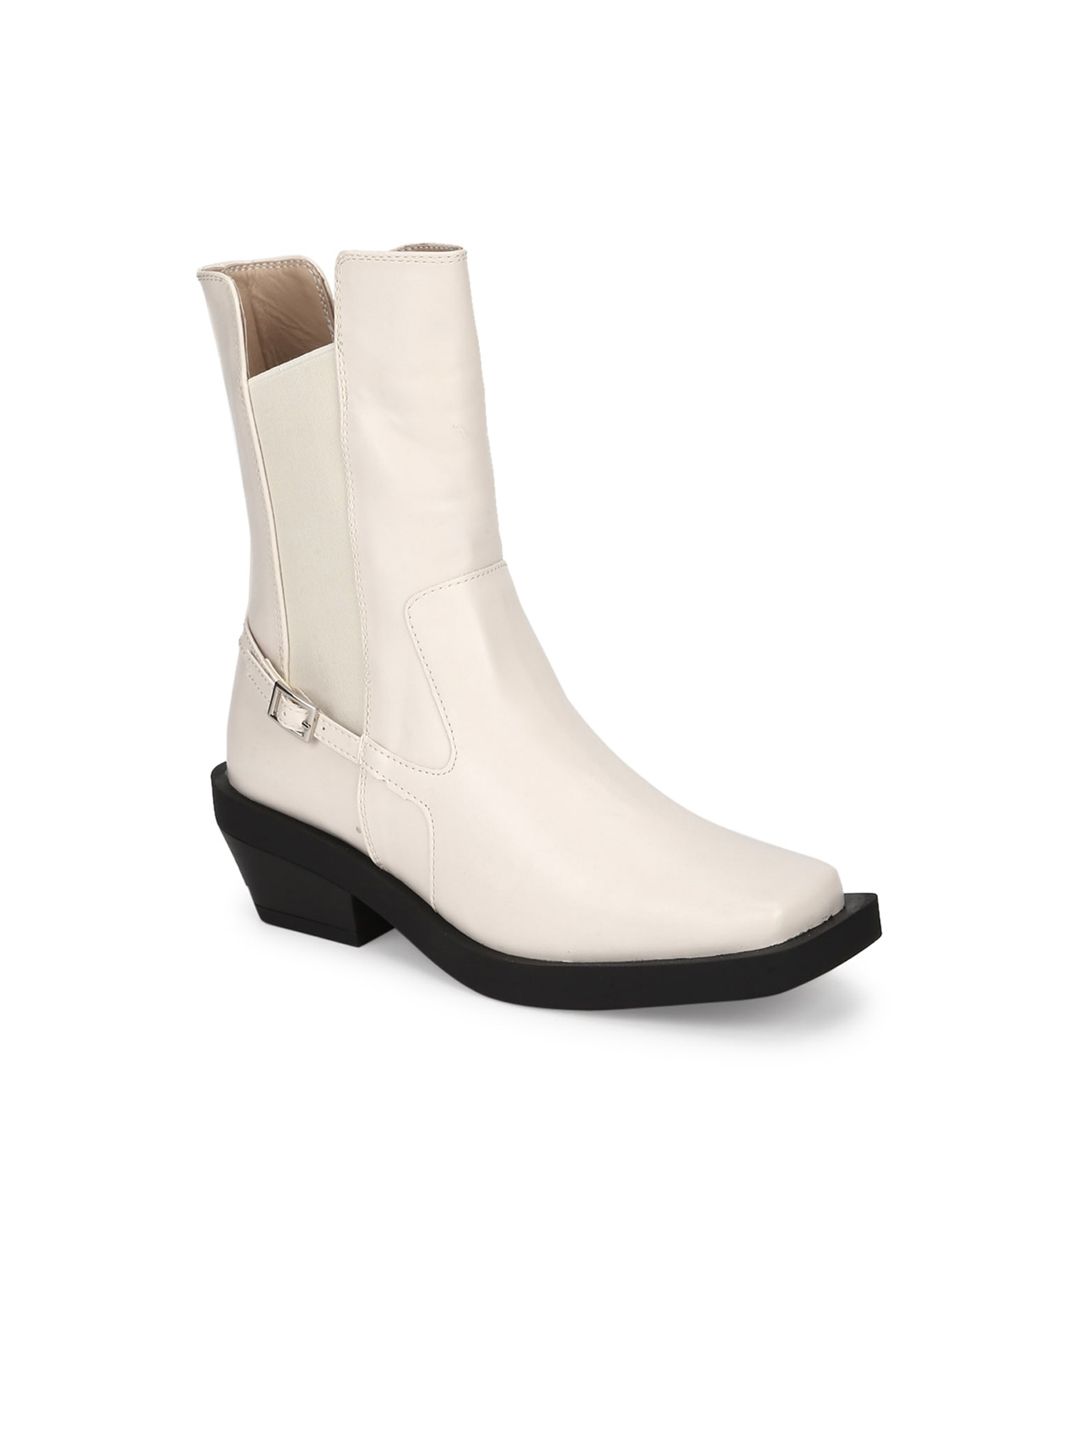 Truffle Collection Beige PU Block Heeled Boots Price in India